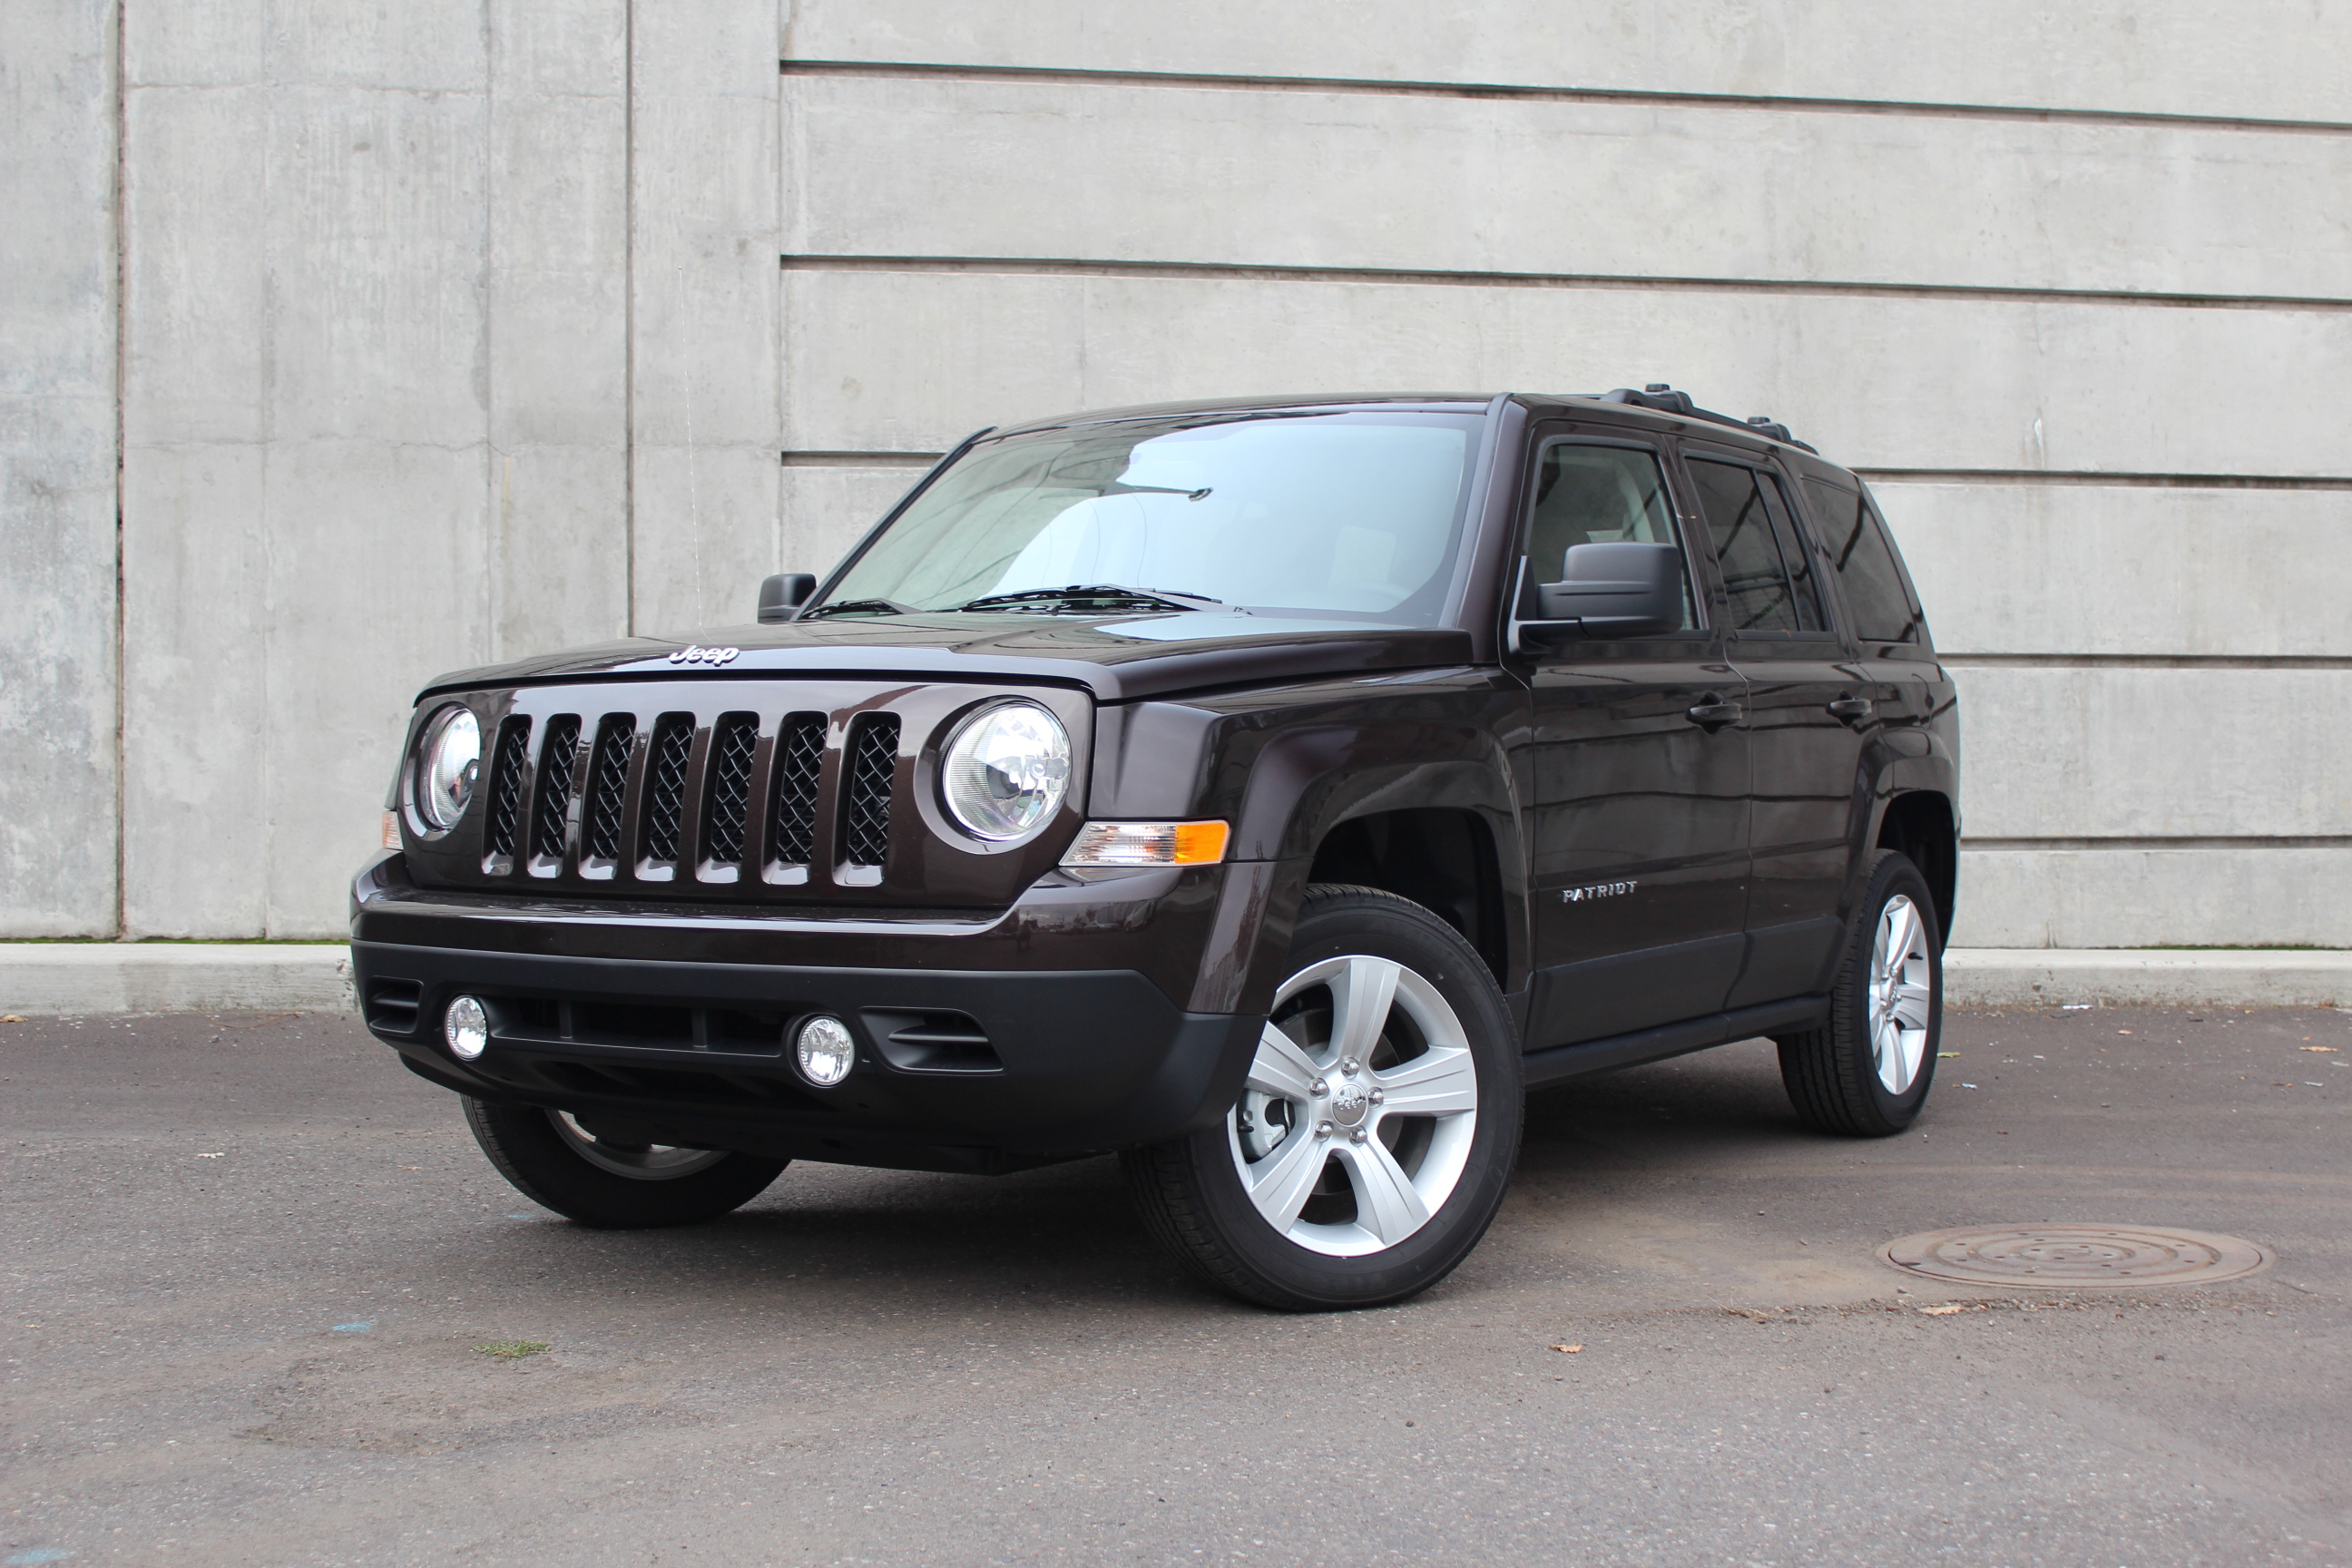 2014 Jeep Patriot Latitude: Does It Drive Better Without the CVT?